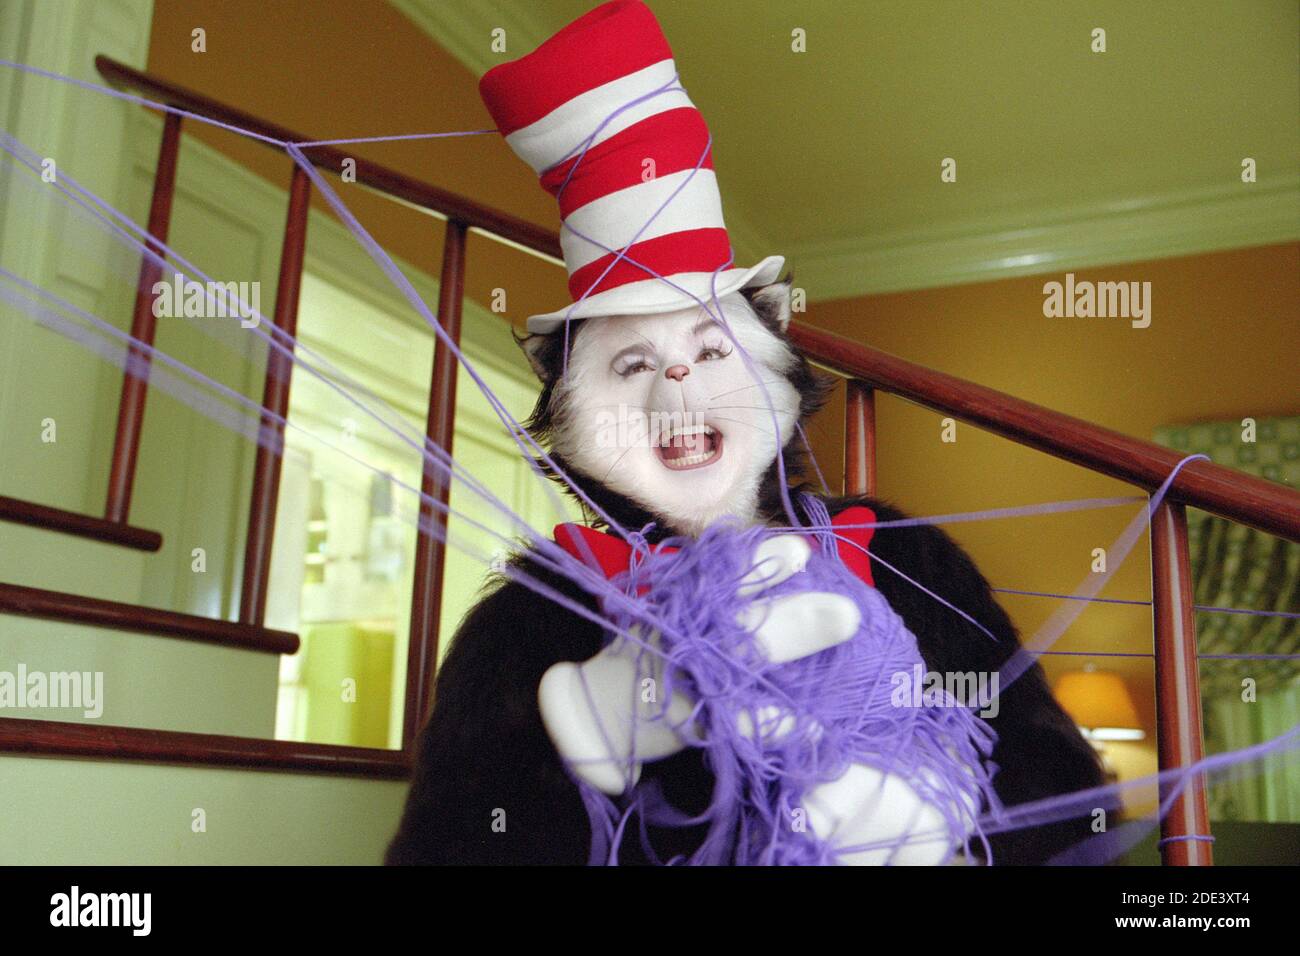 Mike Myers, 'The Cat in the Hat' (2003) Photo credit: Melinda sue Gordon/Universal/The Hollywood Archive / file Reference N. 34078-0525FSTHA Foto Stock